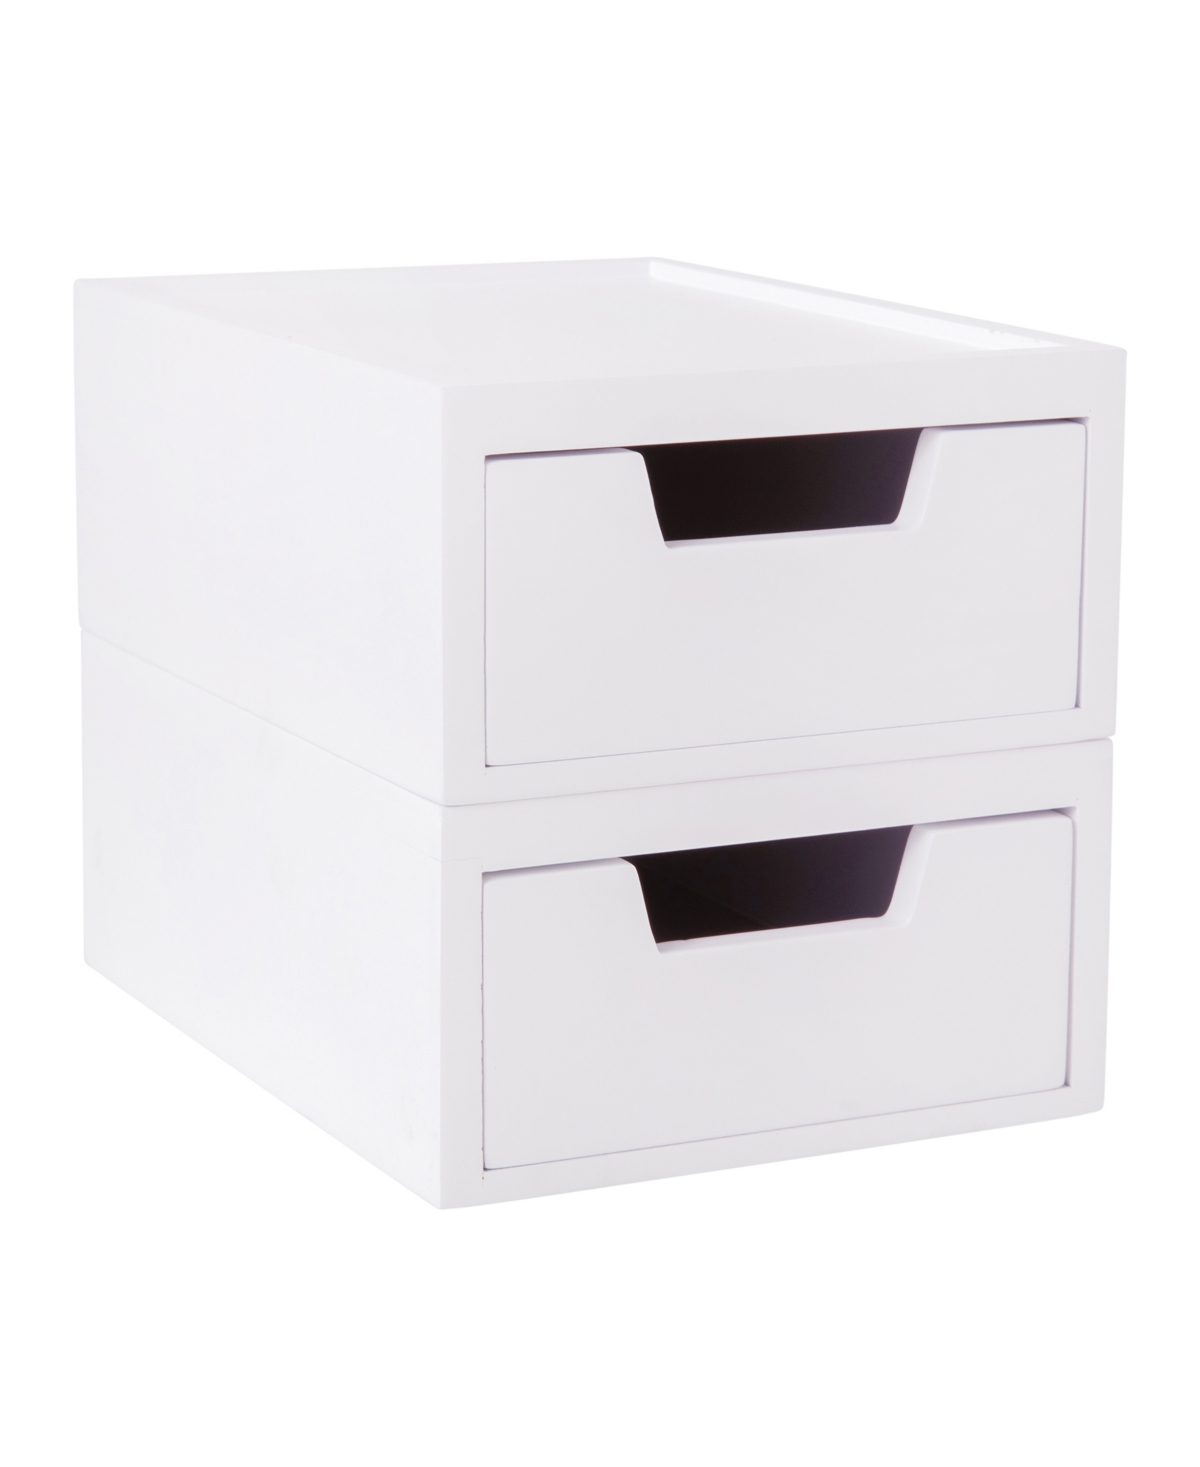 Martha Stewart Weston 2 Compartments Stackable Engineered Wood Boxes With Drawers, Office Desktop Organizers In White